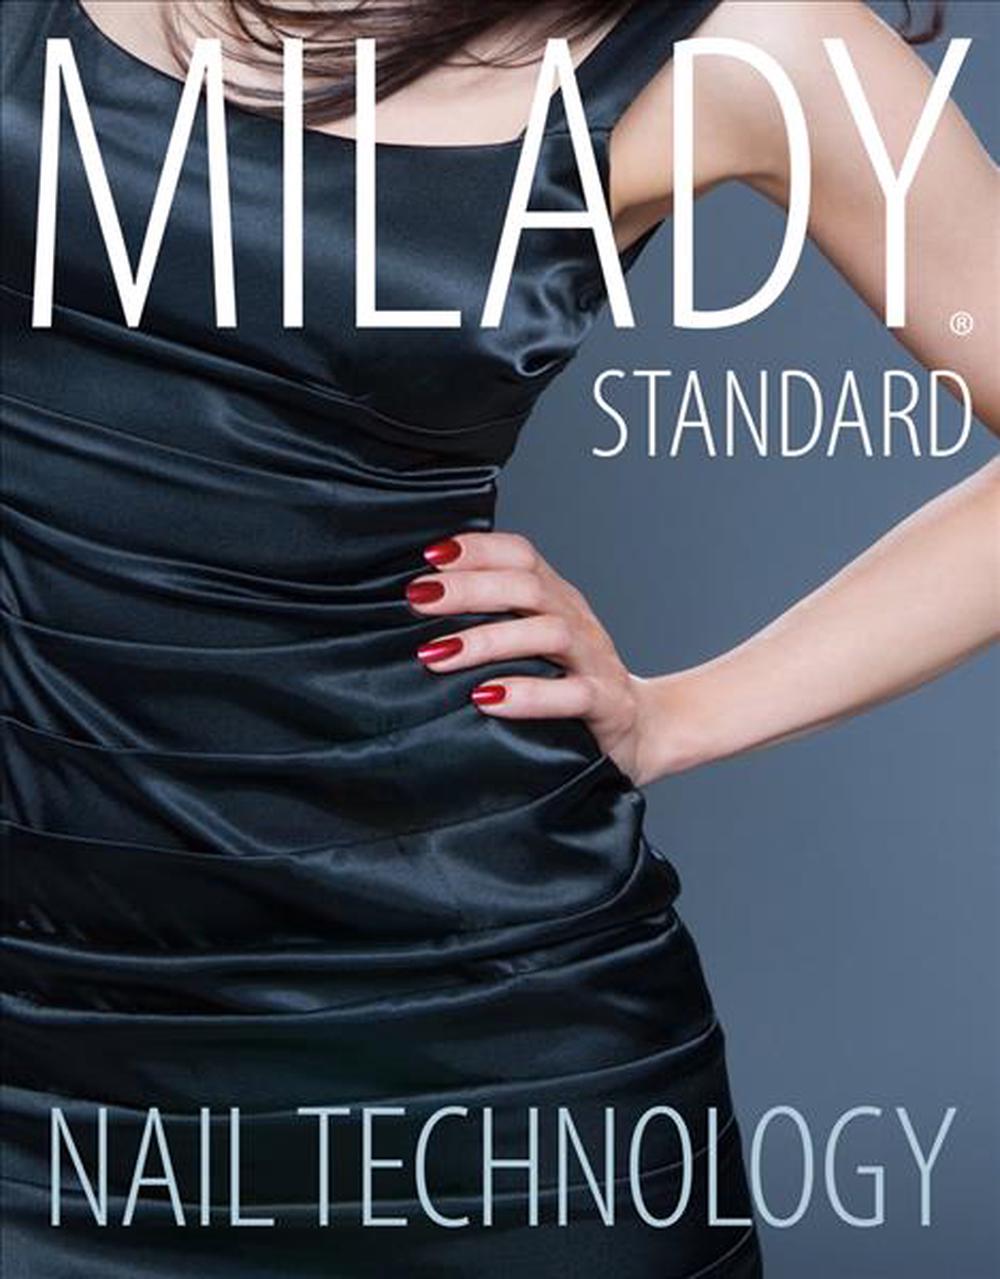 at　Buy　Milady,　by　Nail　Technology,　online　The　Edition　Milady　Paperback,　9781285080475　Standard　7th　Nile